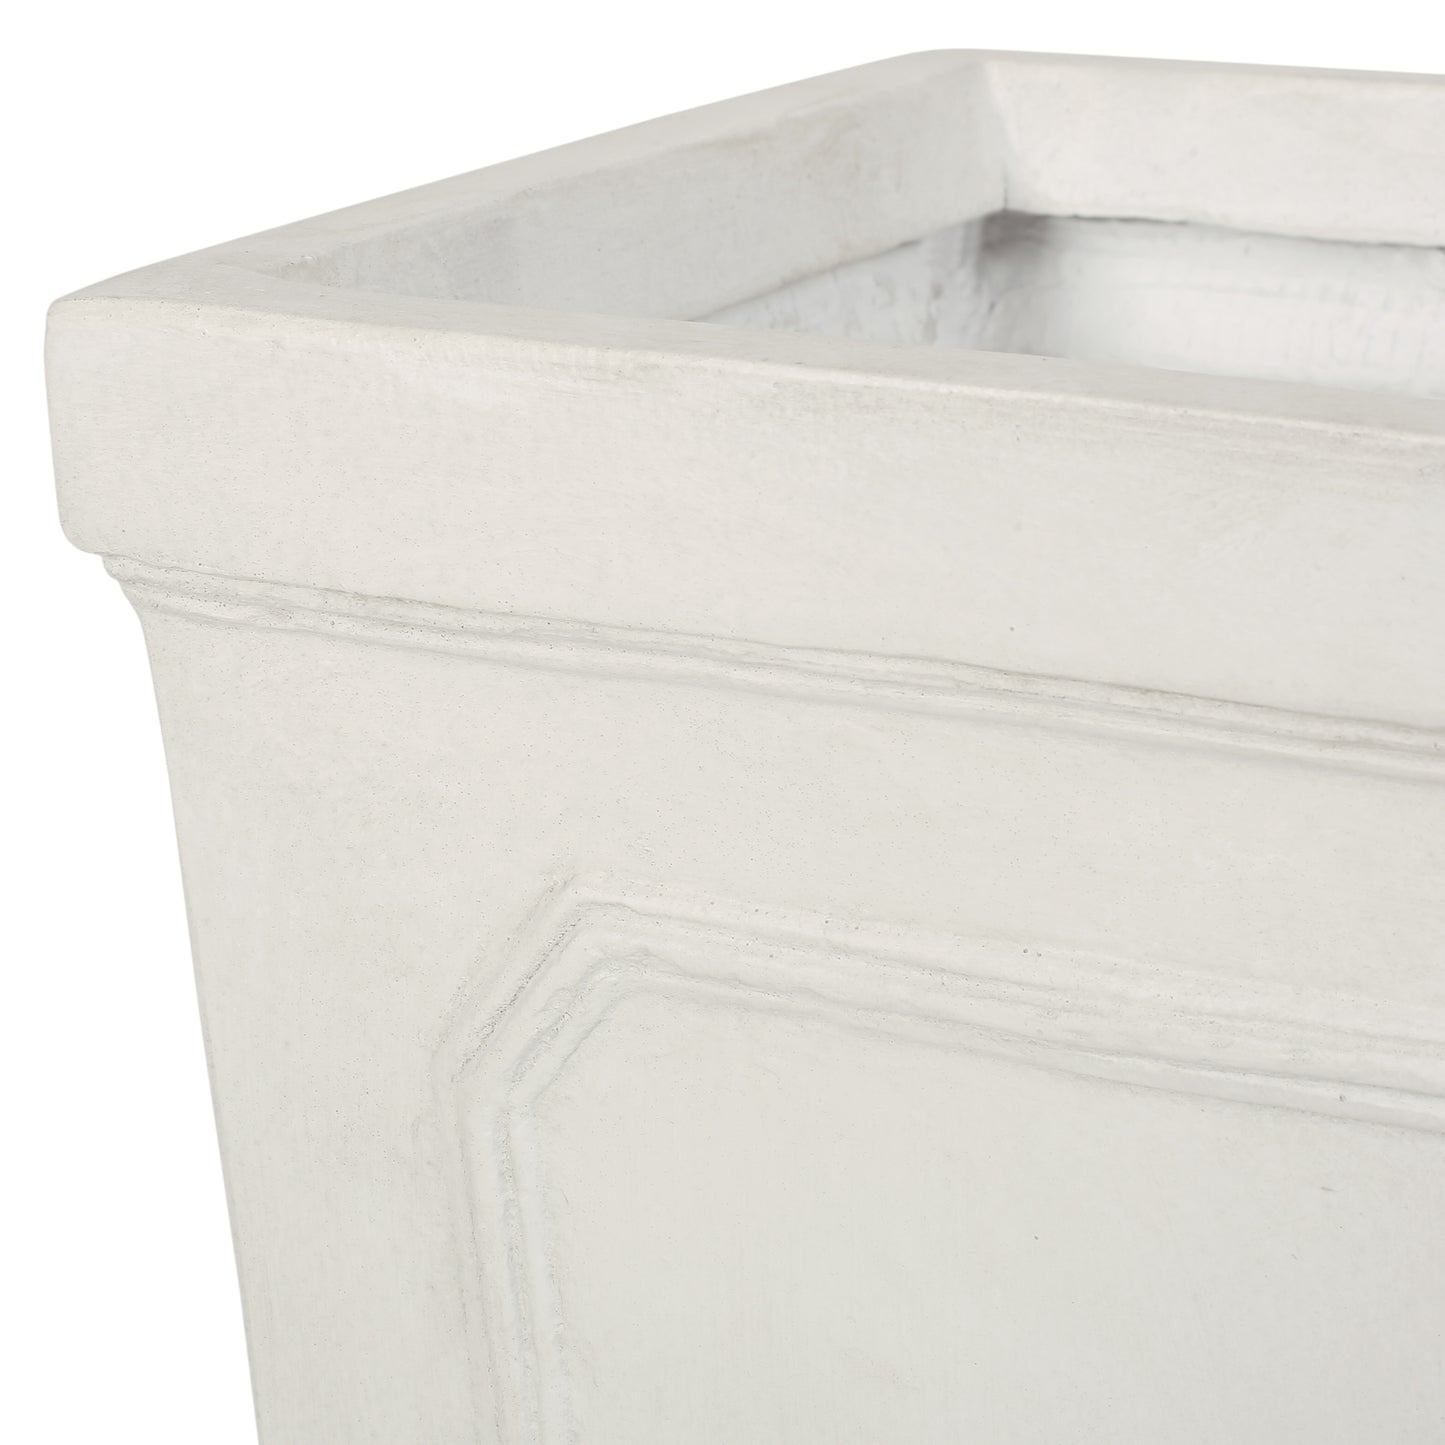 Greg Outdoor Cast Stone Tapered Planter